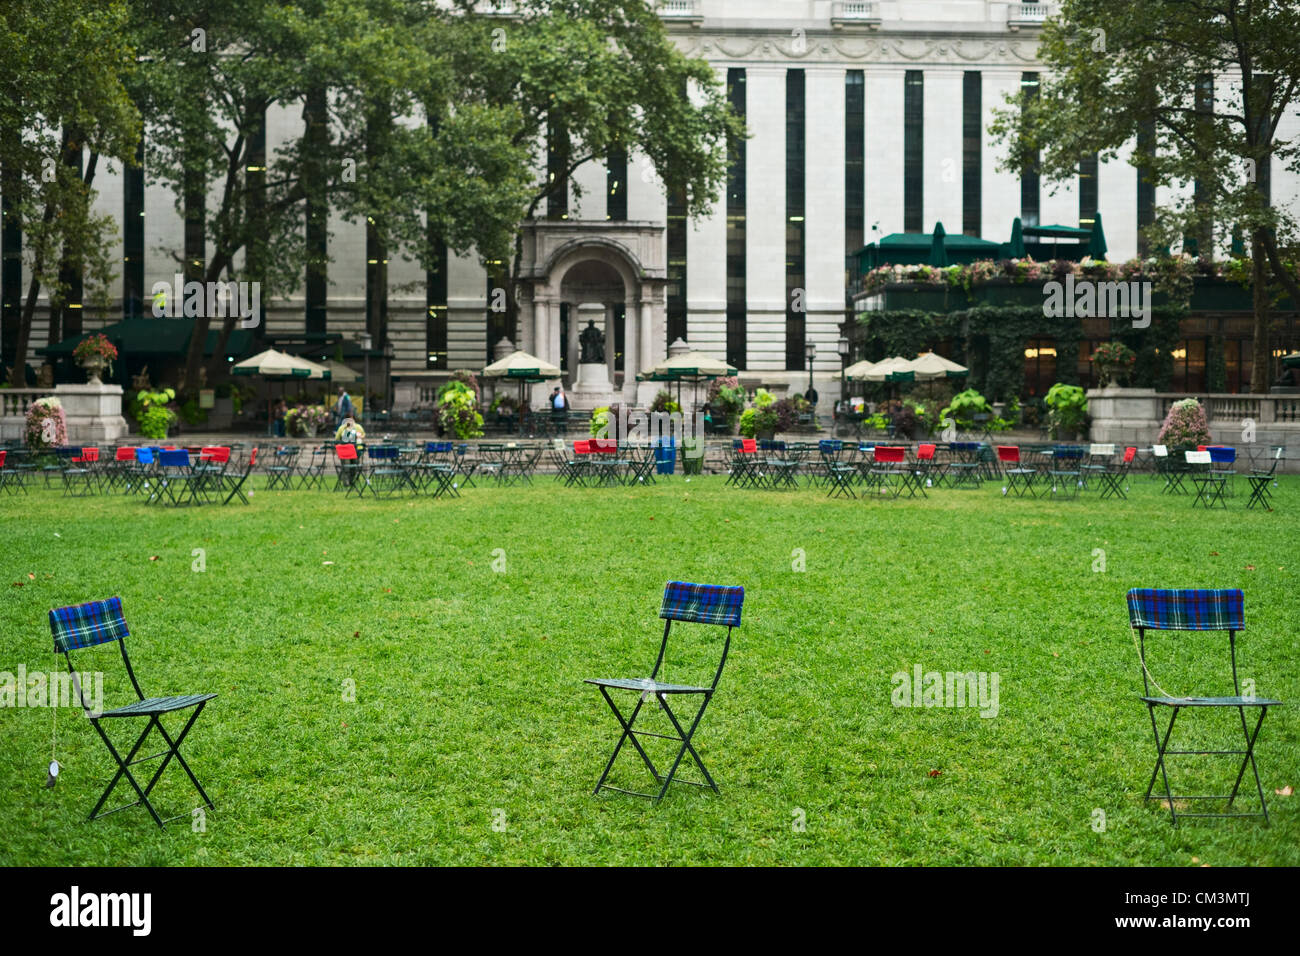 USA. September 27, 2012, New York, NY.  Harris wool fabric on chairs in New York's Bryant Park as part of the Campaign for Wool's new US marketing effort.  Britain's Prince Charles is a sponsor of the Campaign for Wool. Stock Photo